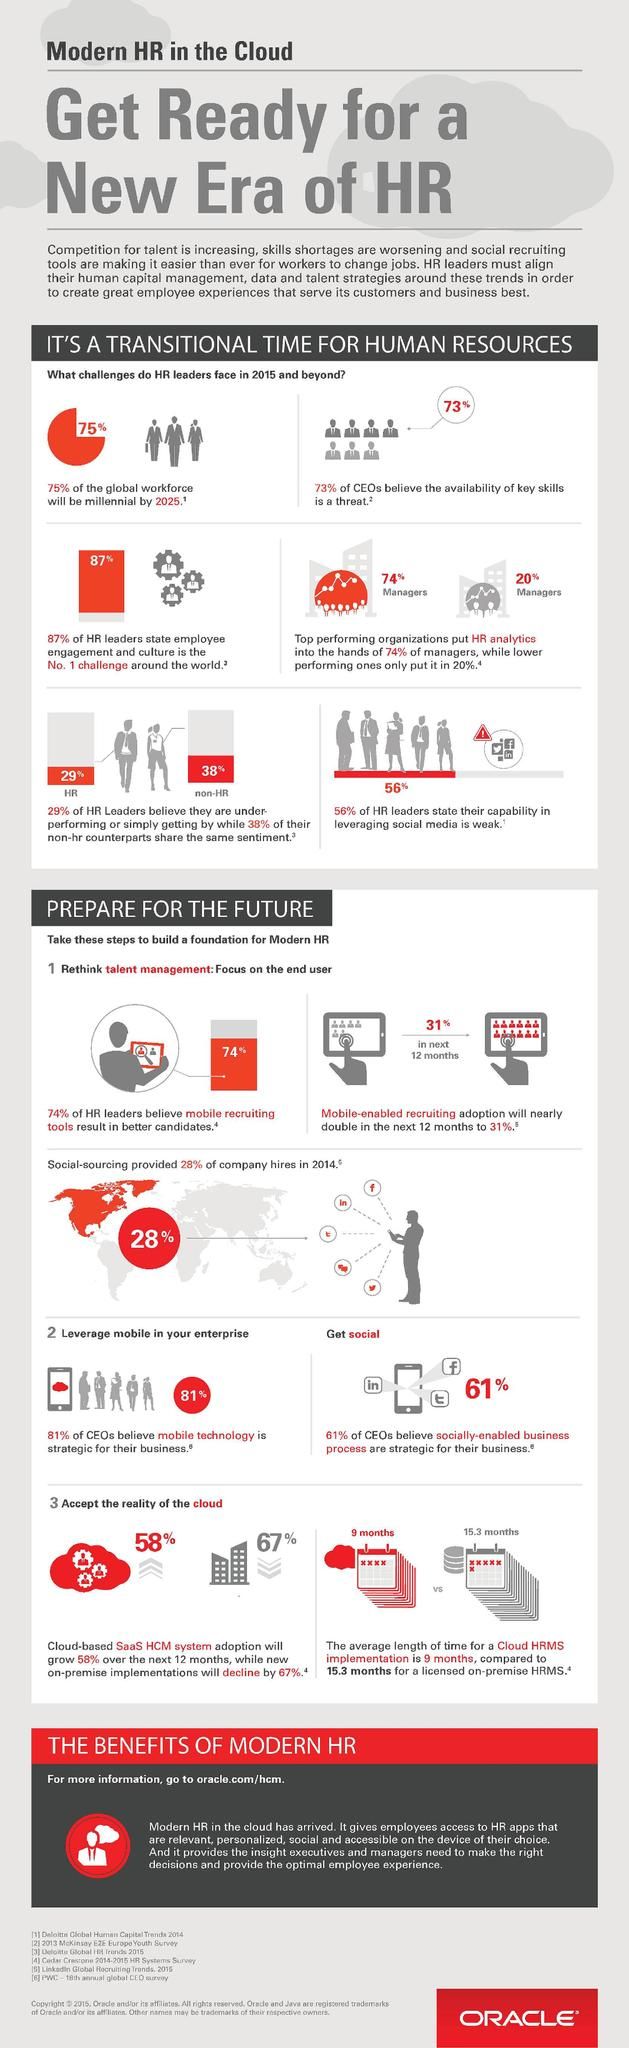 Modern HR in the Cloud - Get Ready for a New Era of HR - Infogrpahic Oracle